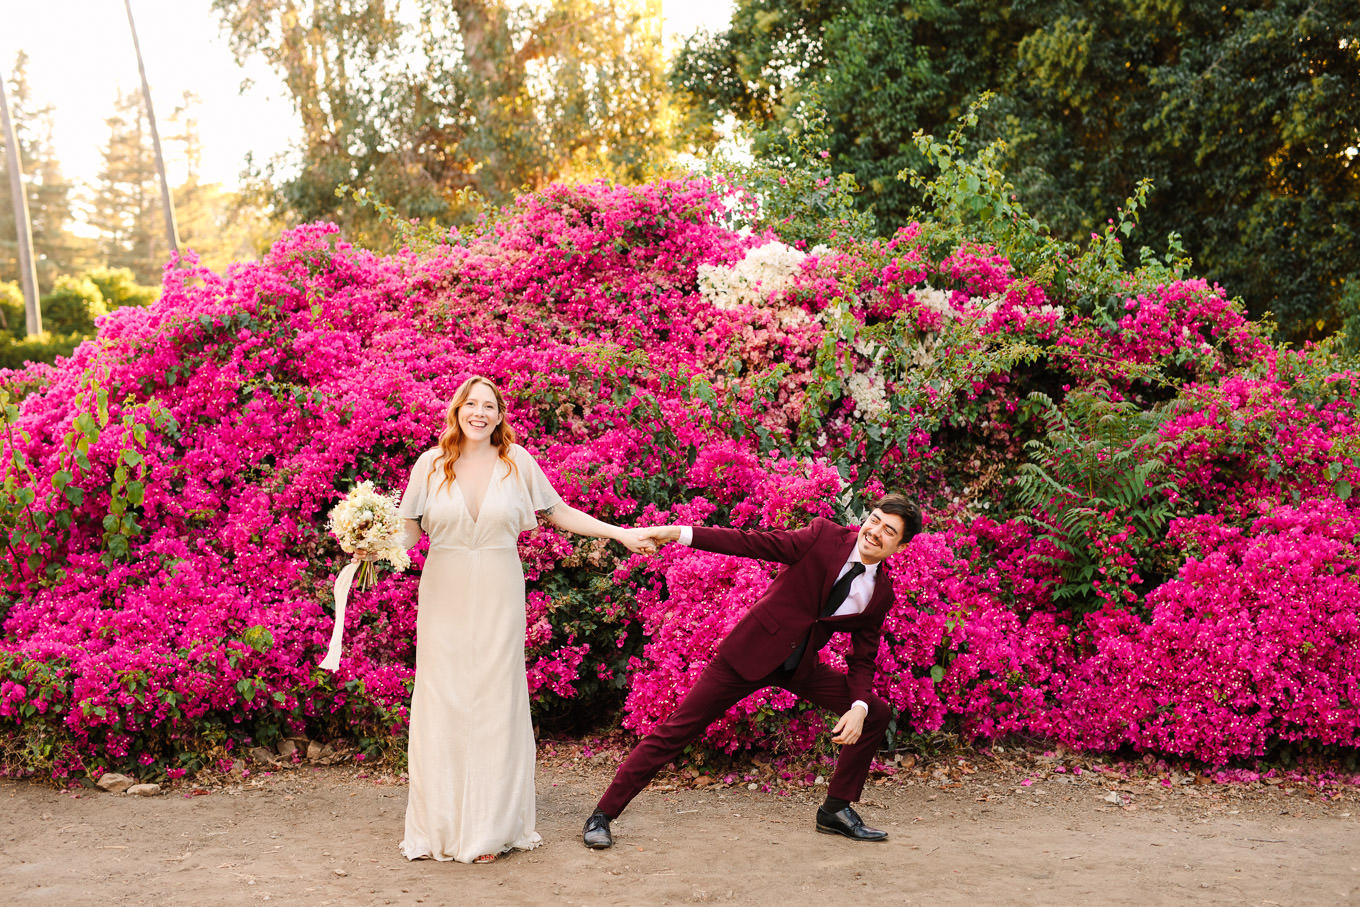 Bride and groom being playful in front of bougainvillea | Los Angeles Arboretum Elopement | Colorful and elevated wedding photography for fun-loving couples in Southern California | #LosAngelesElopement #elopement #LAarboretum #LAskyline #elopementphotos   Source: Mary Costa Photography | Los Angeles